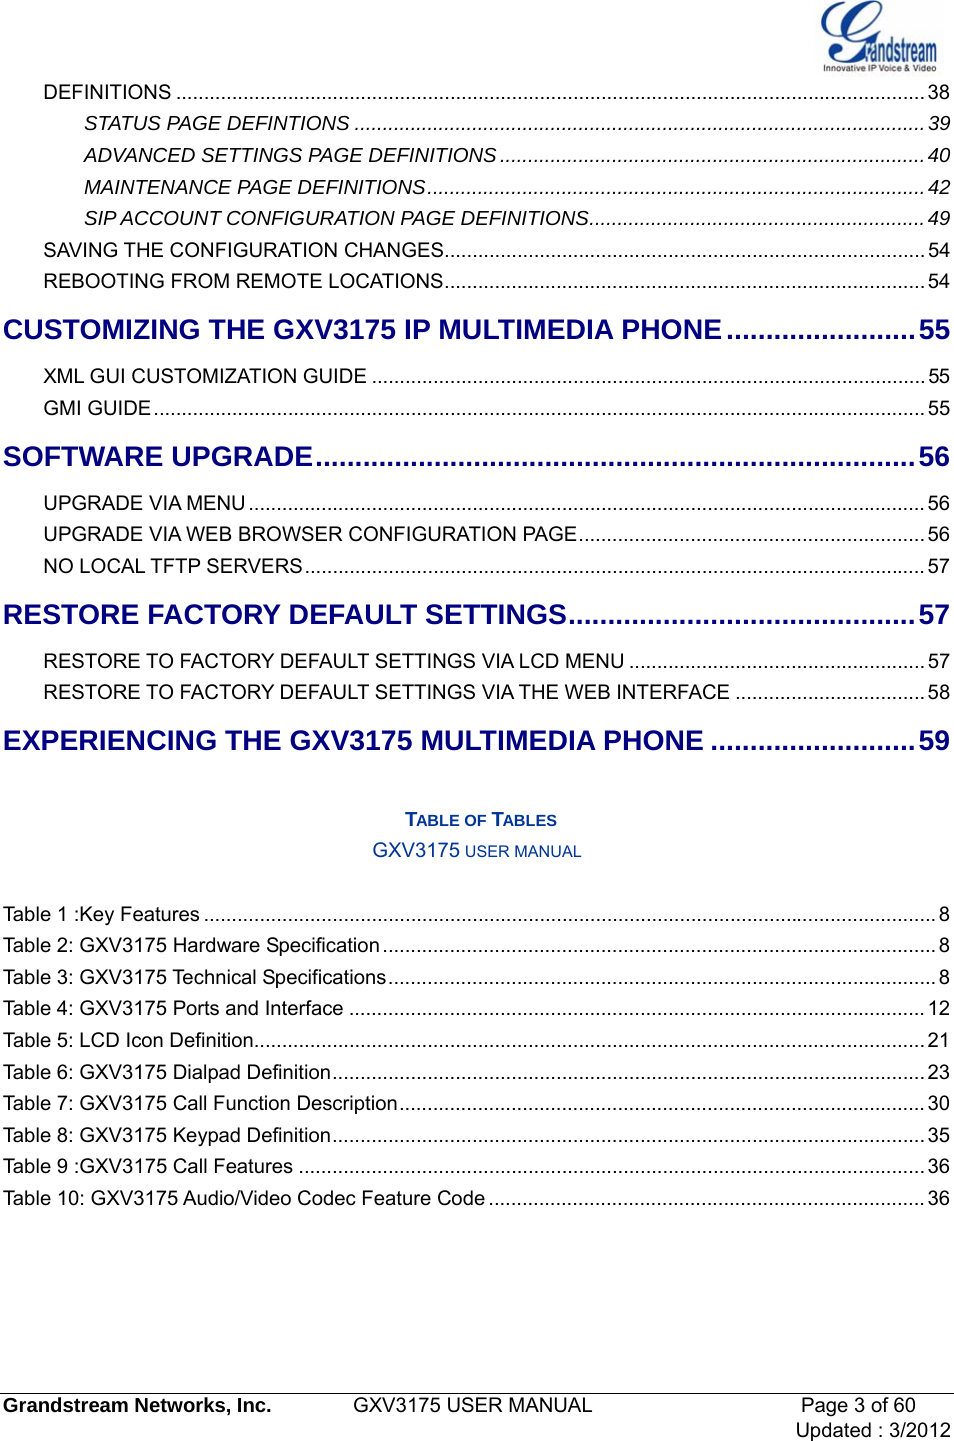   Grandstream Networks, Inc.        GXV3175 USER MANUAL                     Page 3 of 60                                 Updated : 3/2012  DEFINITIONS ...................................................................................................................................... 38STATUS PAGE DEFINTIONS ......................................................................................................39ADVANCED SETTINGS PAGE DEFINITIONS ............................................................................40MAINTENANCE PAGE DEFINITIONS.........................................................................................42SIP ACCOUNT CONFIGURATION PAGE DEFINITIONS............................................................49SAVING THE CONFIGURATION CHANGES......................................................................................54REBOOTING FROM REMOTE LOCATIONS......................................................................................54CUSTOMIZING THE GXV3175 IP MULTIMEDIA PHONE........................55 XML GUI CUSTOMIZATION GUIDE ...................................................................................................55 GMI GUIDE..........................................................................................................................................55 SOFTWARE UPGRADE............................................................................56UPGRADE VIA MENU ......................................................................................................................... 56UPGRADE VIA WEB BROWSER CONFIGURATION PAGE..............................................................56NO LOCAL TFTP SERVERS............................................................................................................... 57RESTORE FACTORY DEFAULT SETTINGS............................................57RESTORE TO FACTORY DEFAULT SETTINGS VIA LCD MENU .....................................................57RESTORE TO FACTORY DEFAULT SETTINGS VIA THE WEB INTERFACE .................................. 58EXPERIENCING THE GXV3175 MULTIMEDIA PHONE ..........................59  TABLE OF TABLES GXV3175 USER MANUAL  Table 1 :Key Features ................................................................................................................................... 8Table 2: GXV3175 Hardware Specification................................................................................................... 8Table 3: GXV3175 Technical Specifications.................................................................................................. 8Table 4: GXV3175 Ports and Interface ....................................................................................................... 12Table 5: LCD Icon Definition........................................................................................................................ 21Table 6: GXV3175 Dialpad Definition.......................................................................................................... 23Table 7: GXV3175 Call Function Description.............................................................................................. 30 Table 8: GXV3175 Keypad Definition.......................................................................................................... 35Table 9 :GXV3175 Call Features ................................................................................................................ 36Table 10: GXV3175 Audio/Video Codec Feature Code ..............................................................................36     